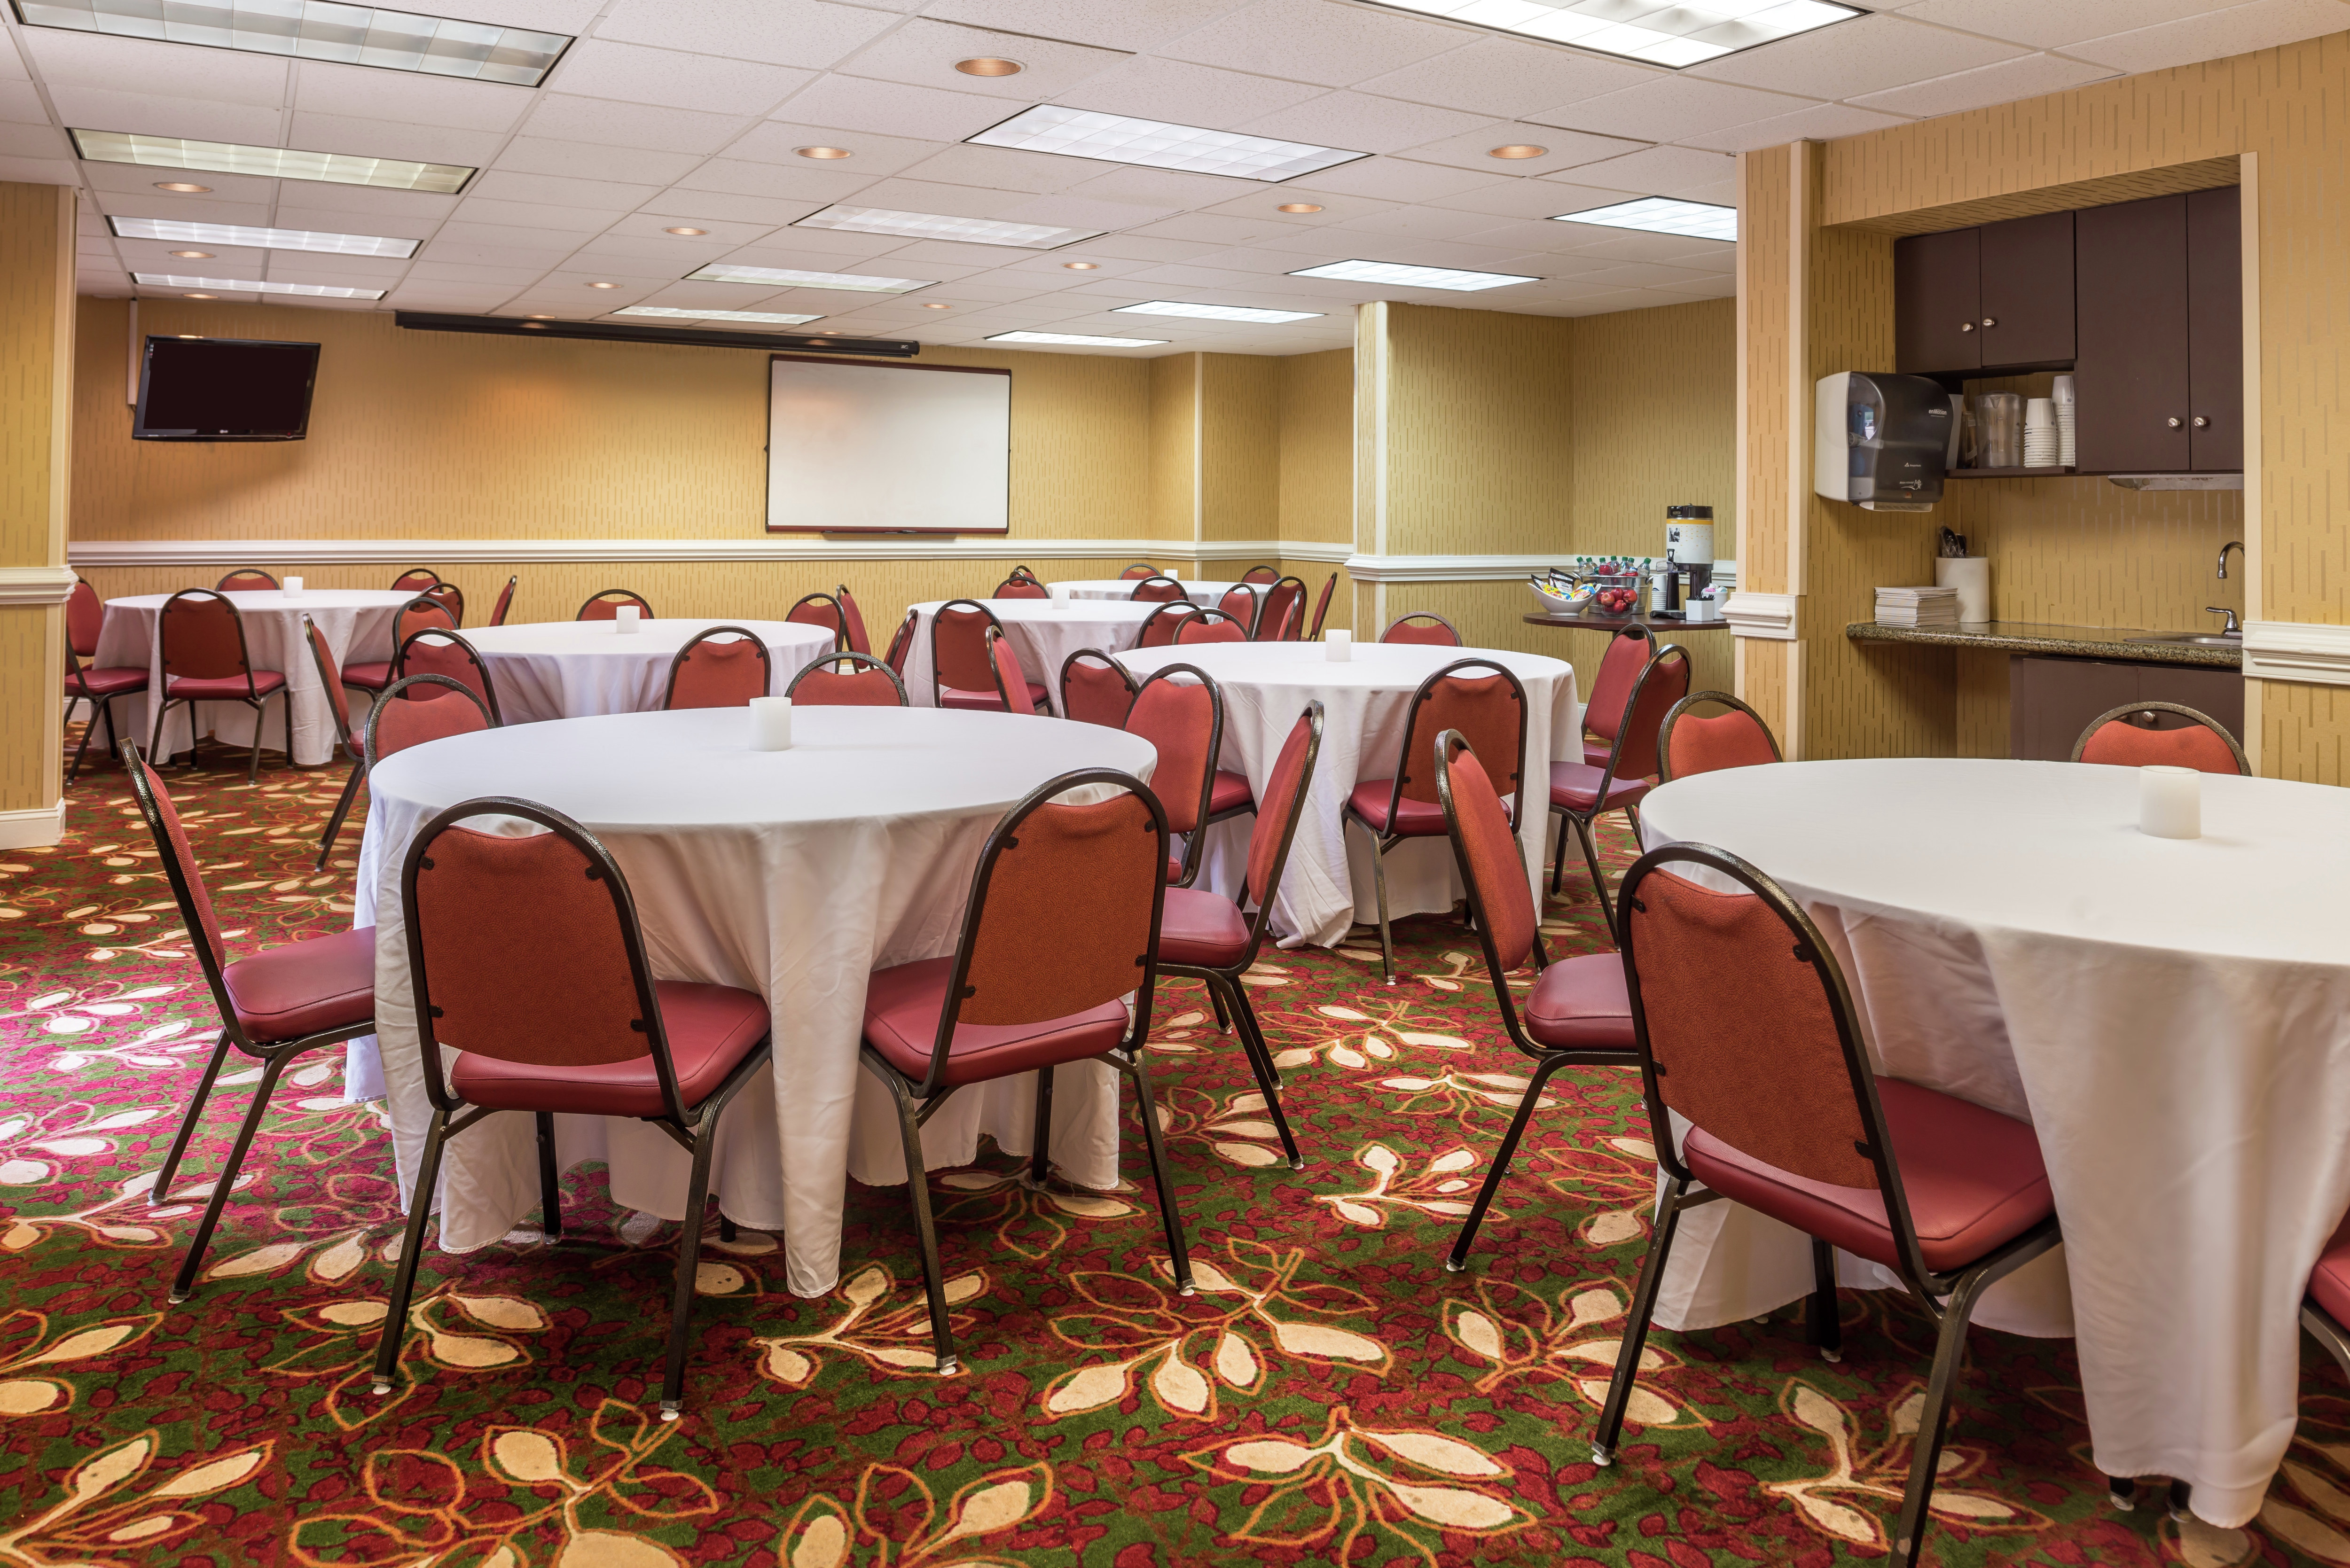 Red Chairs at Banquet Tables With White Linens, TV, Presentation Screen, and Refreshment Area in Meeting Room